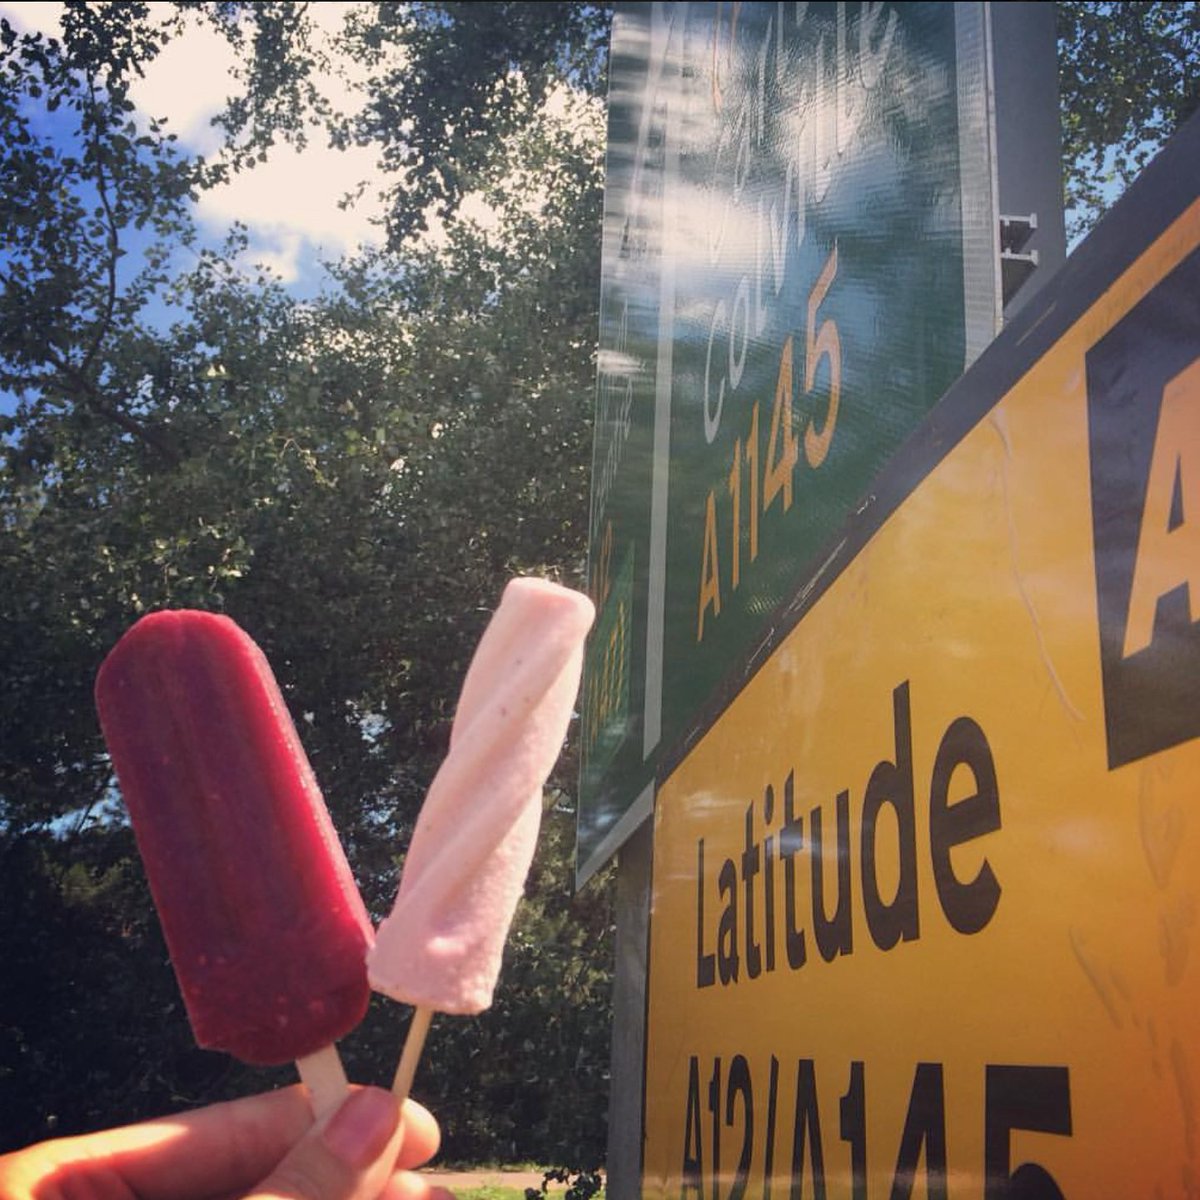 So excited our @licketyice lollies will be in the street food area @LatitudeFest #icelollies #suffolk #allnaturalingredients #supportlocal